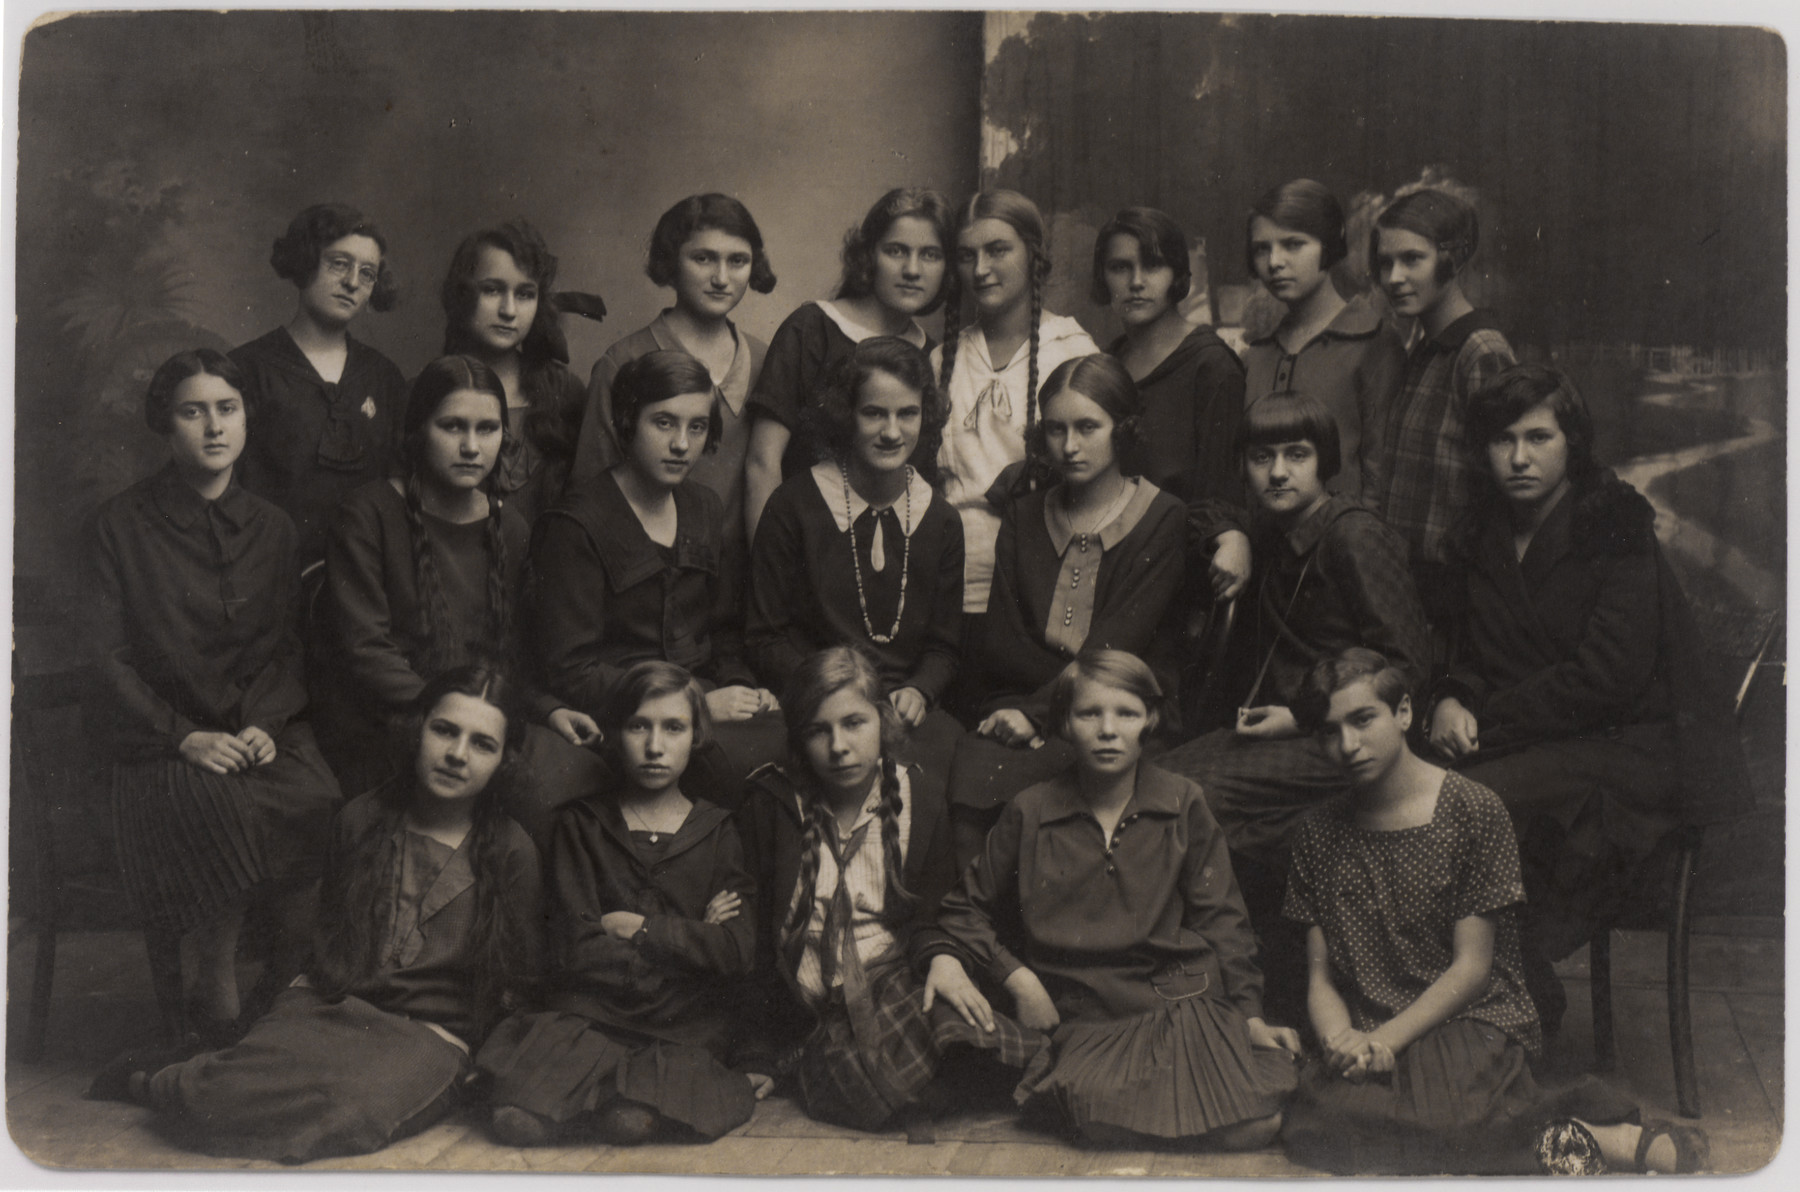 Portrait of a group of young women in a gymnasium class in or near Sanok.

Helena Amkraut is pictured in the middle row on the right.